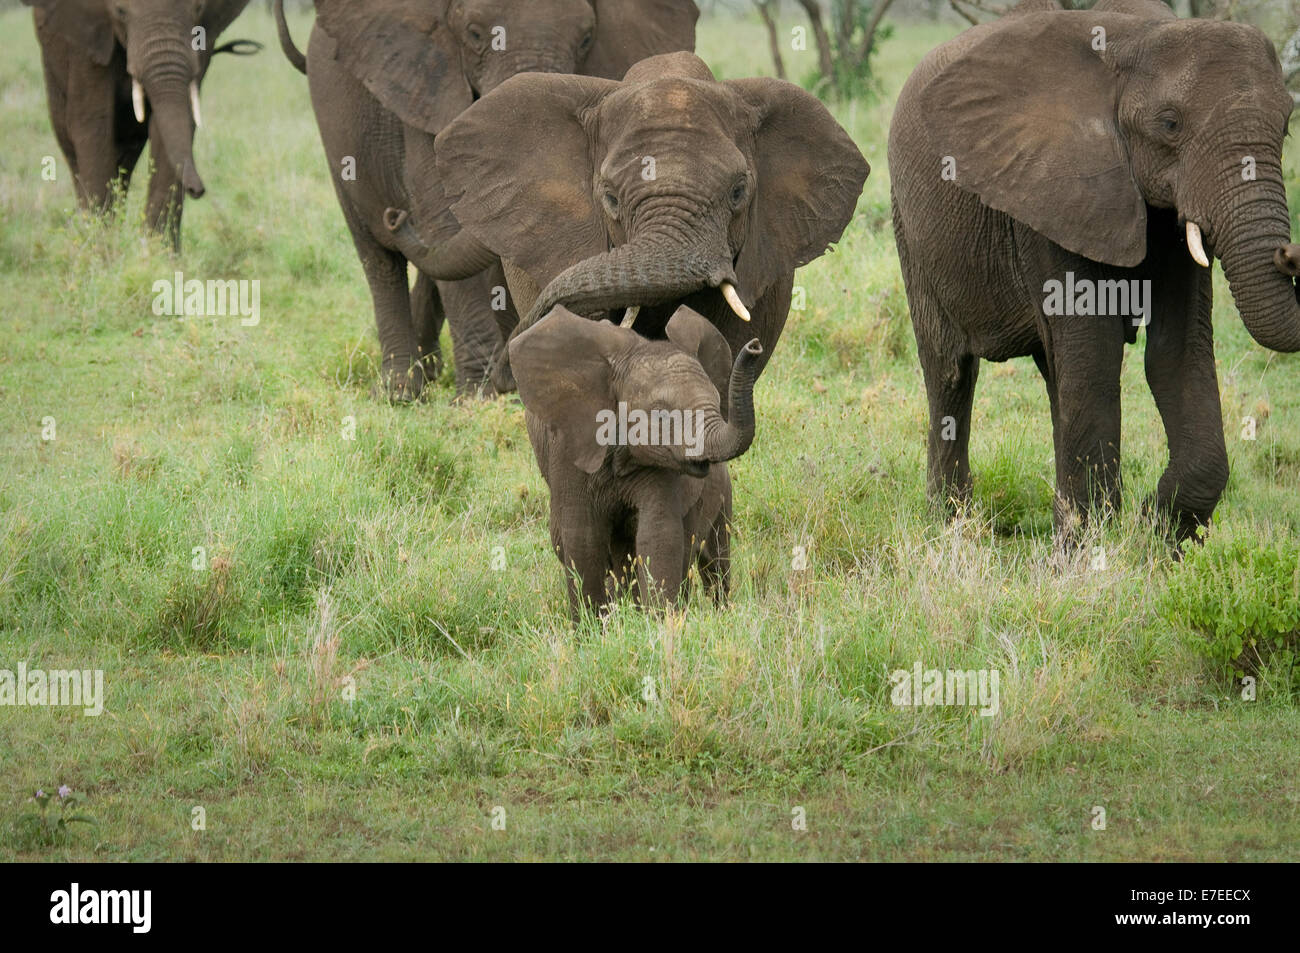 Elephants in line with baby in front Stock Photo